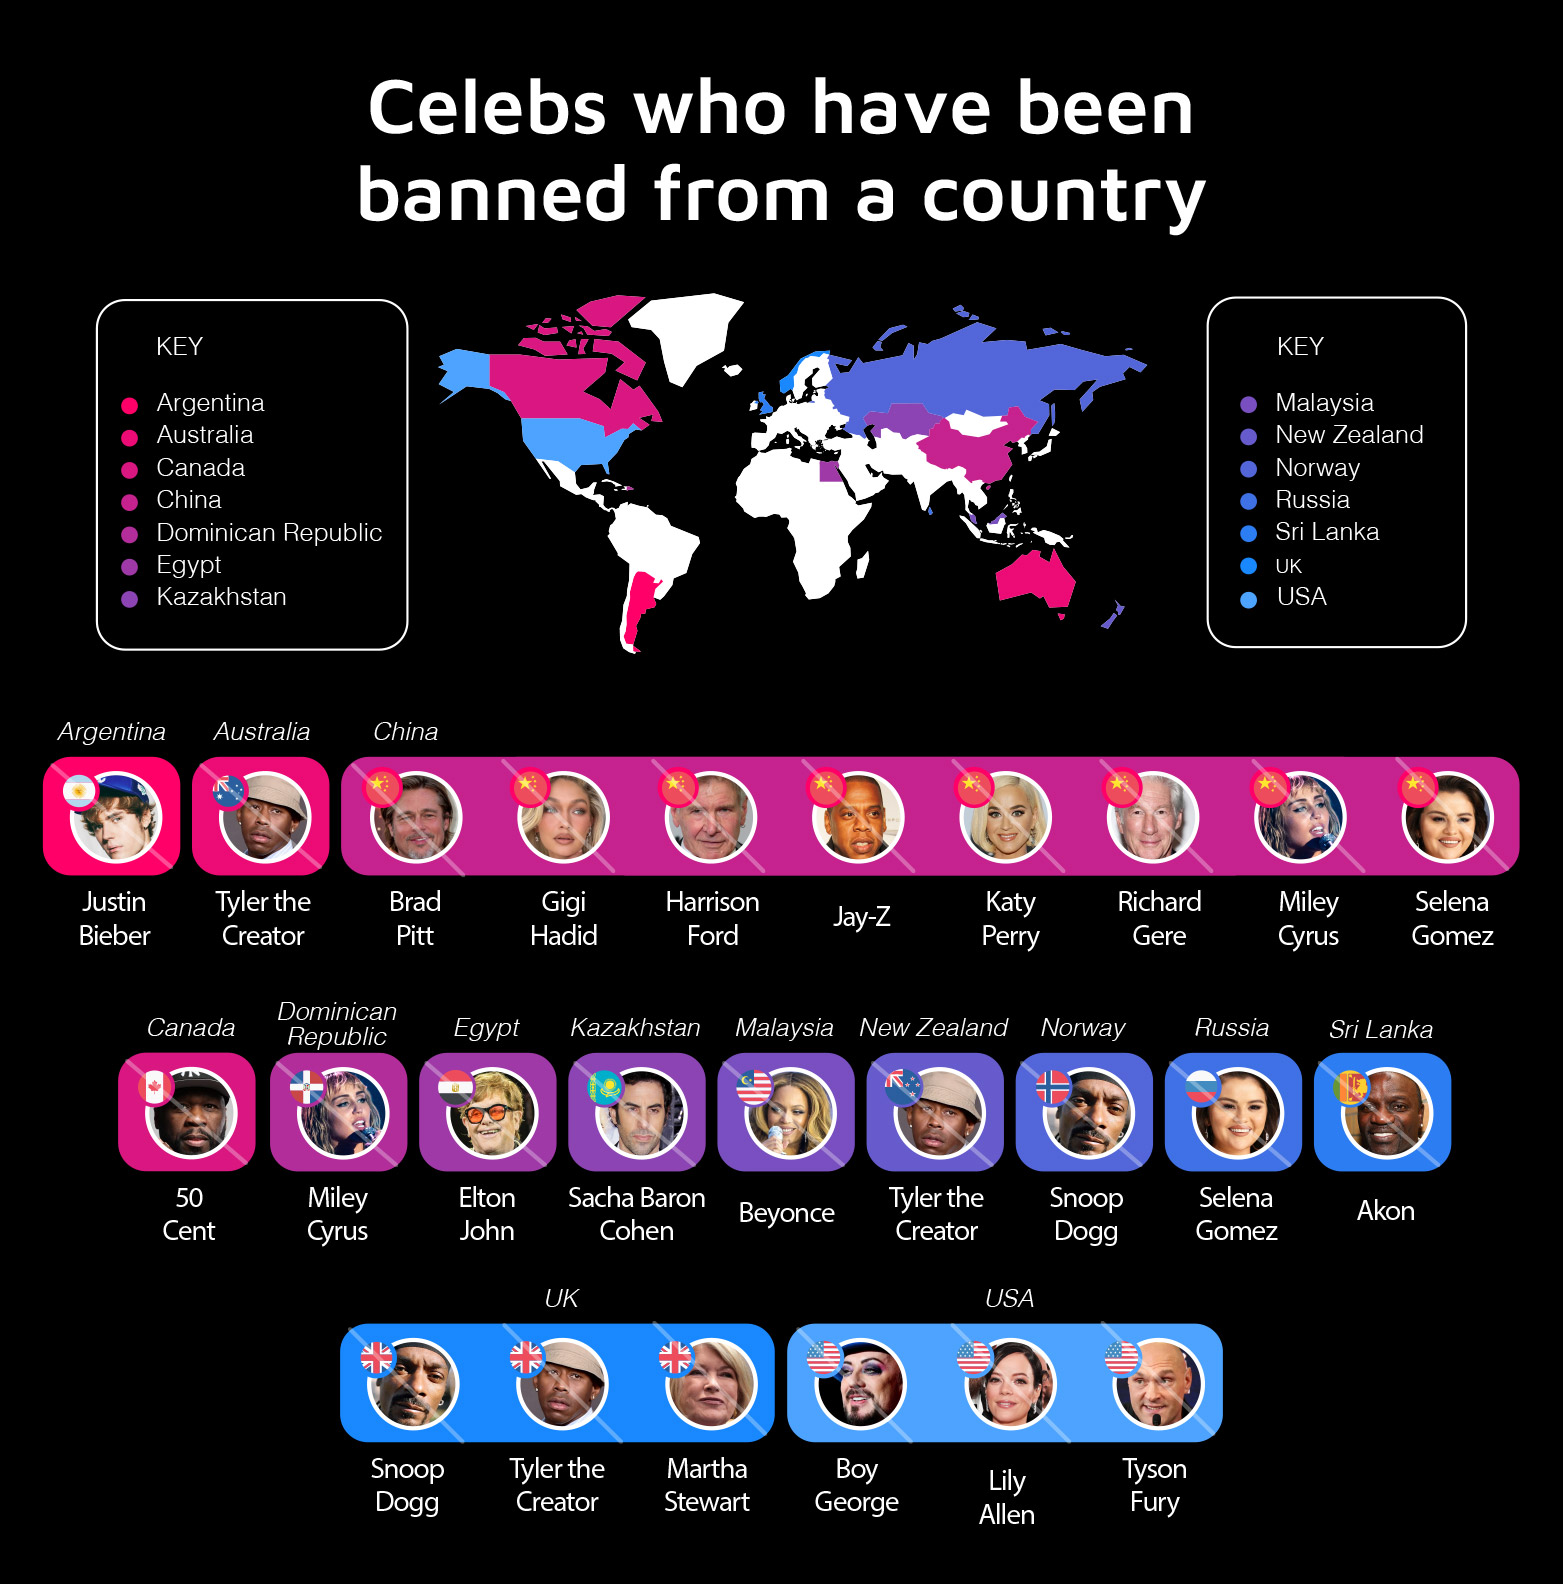 Celebs banned from a country